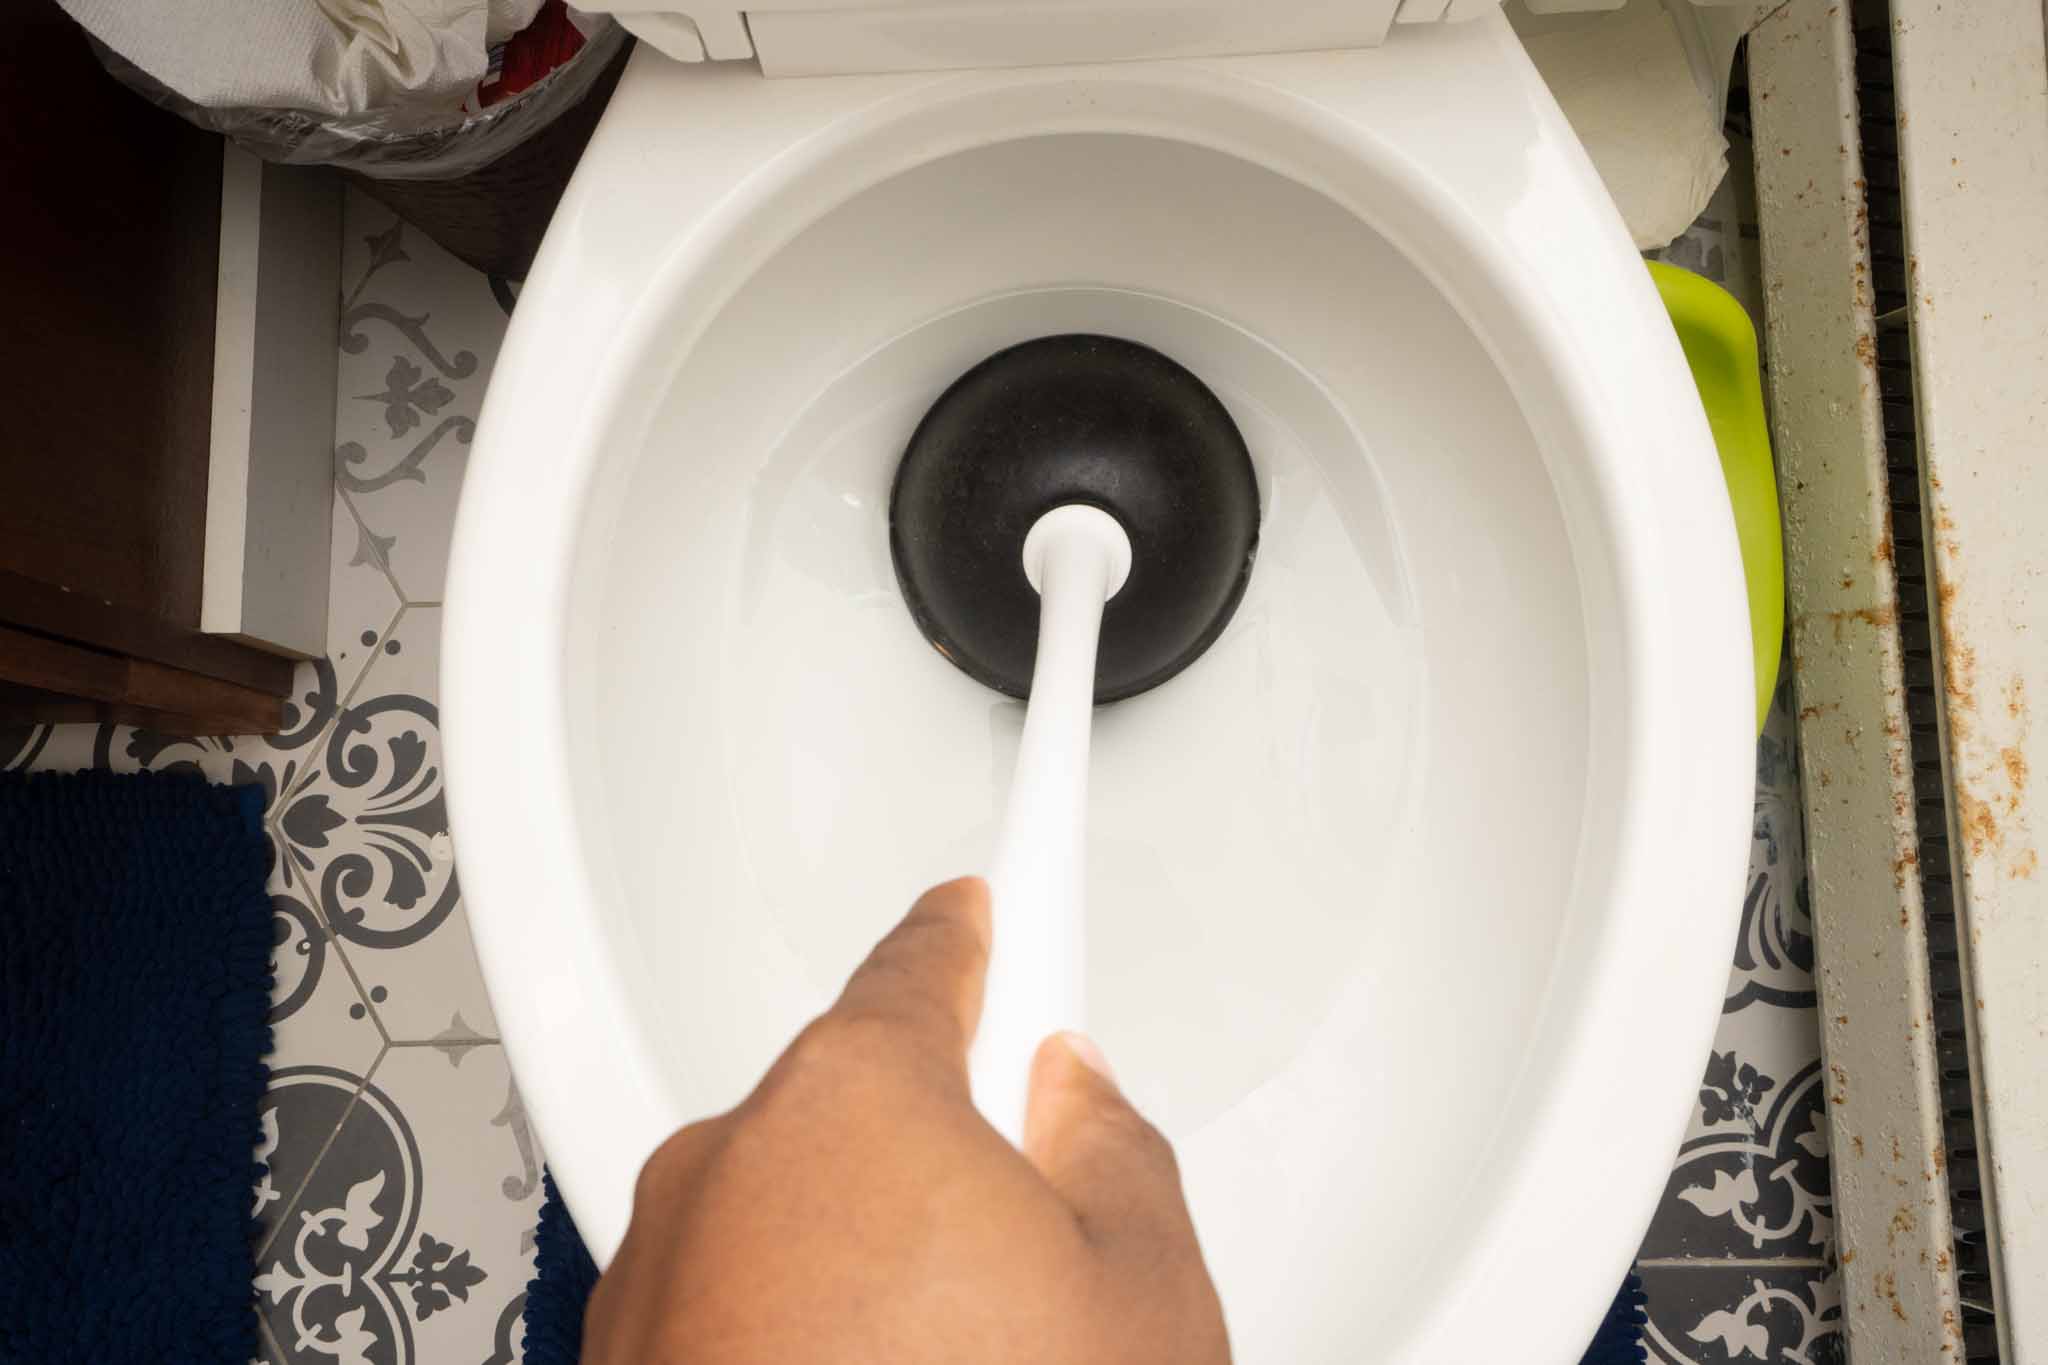 using plunger to clear toilet